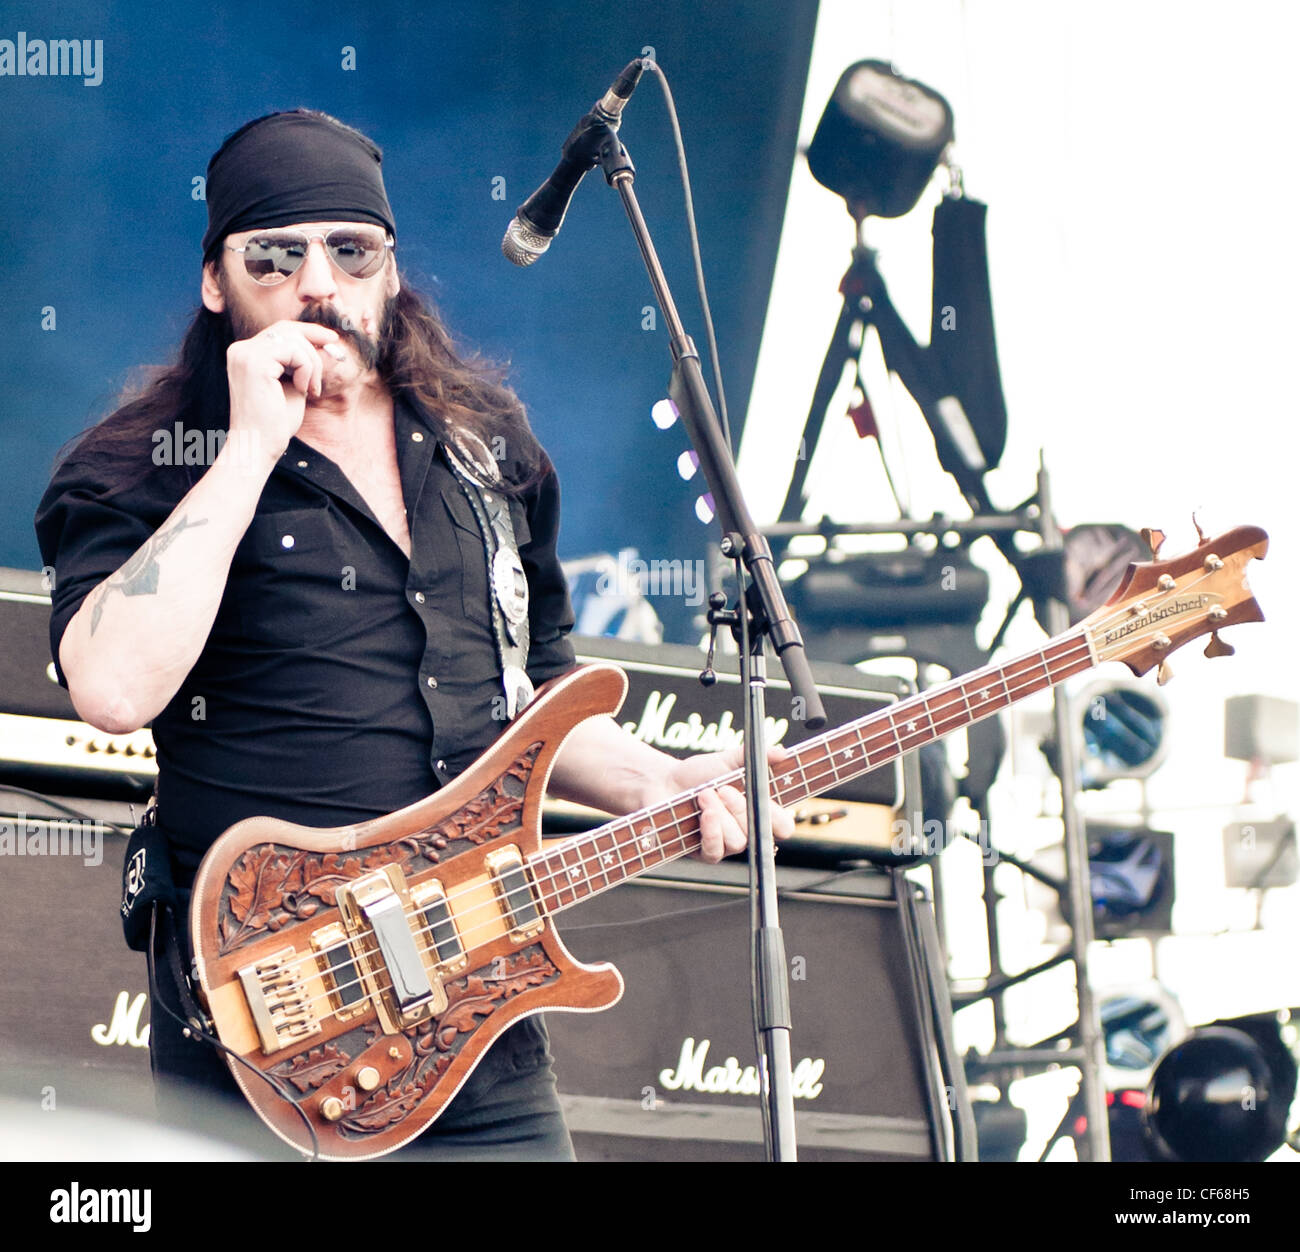 Motorhead performing at Heavy MTL 2011 in Montreal, QC. Stock Photo